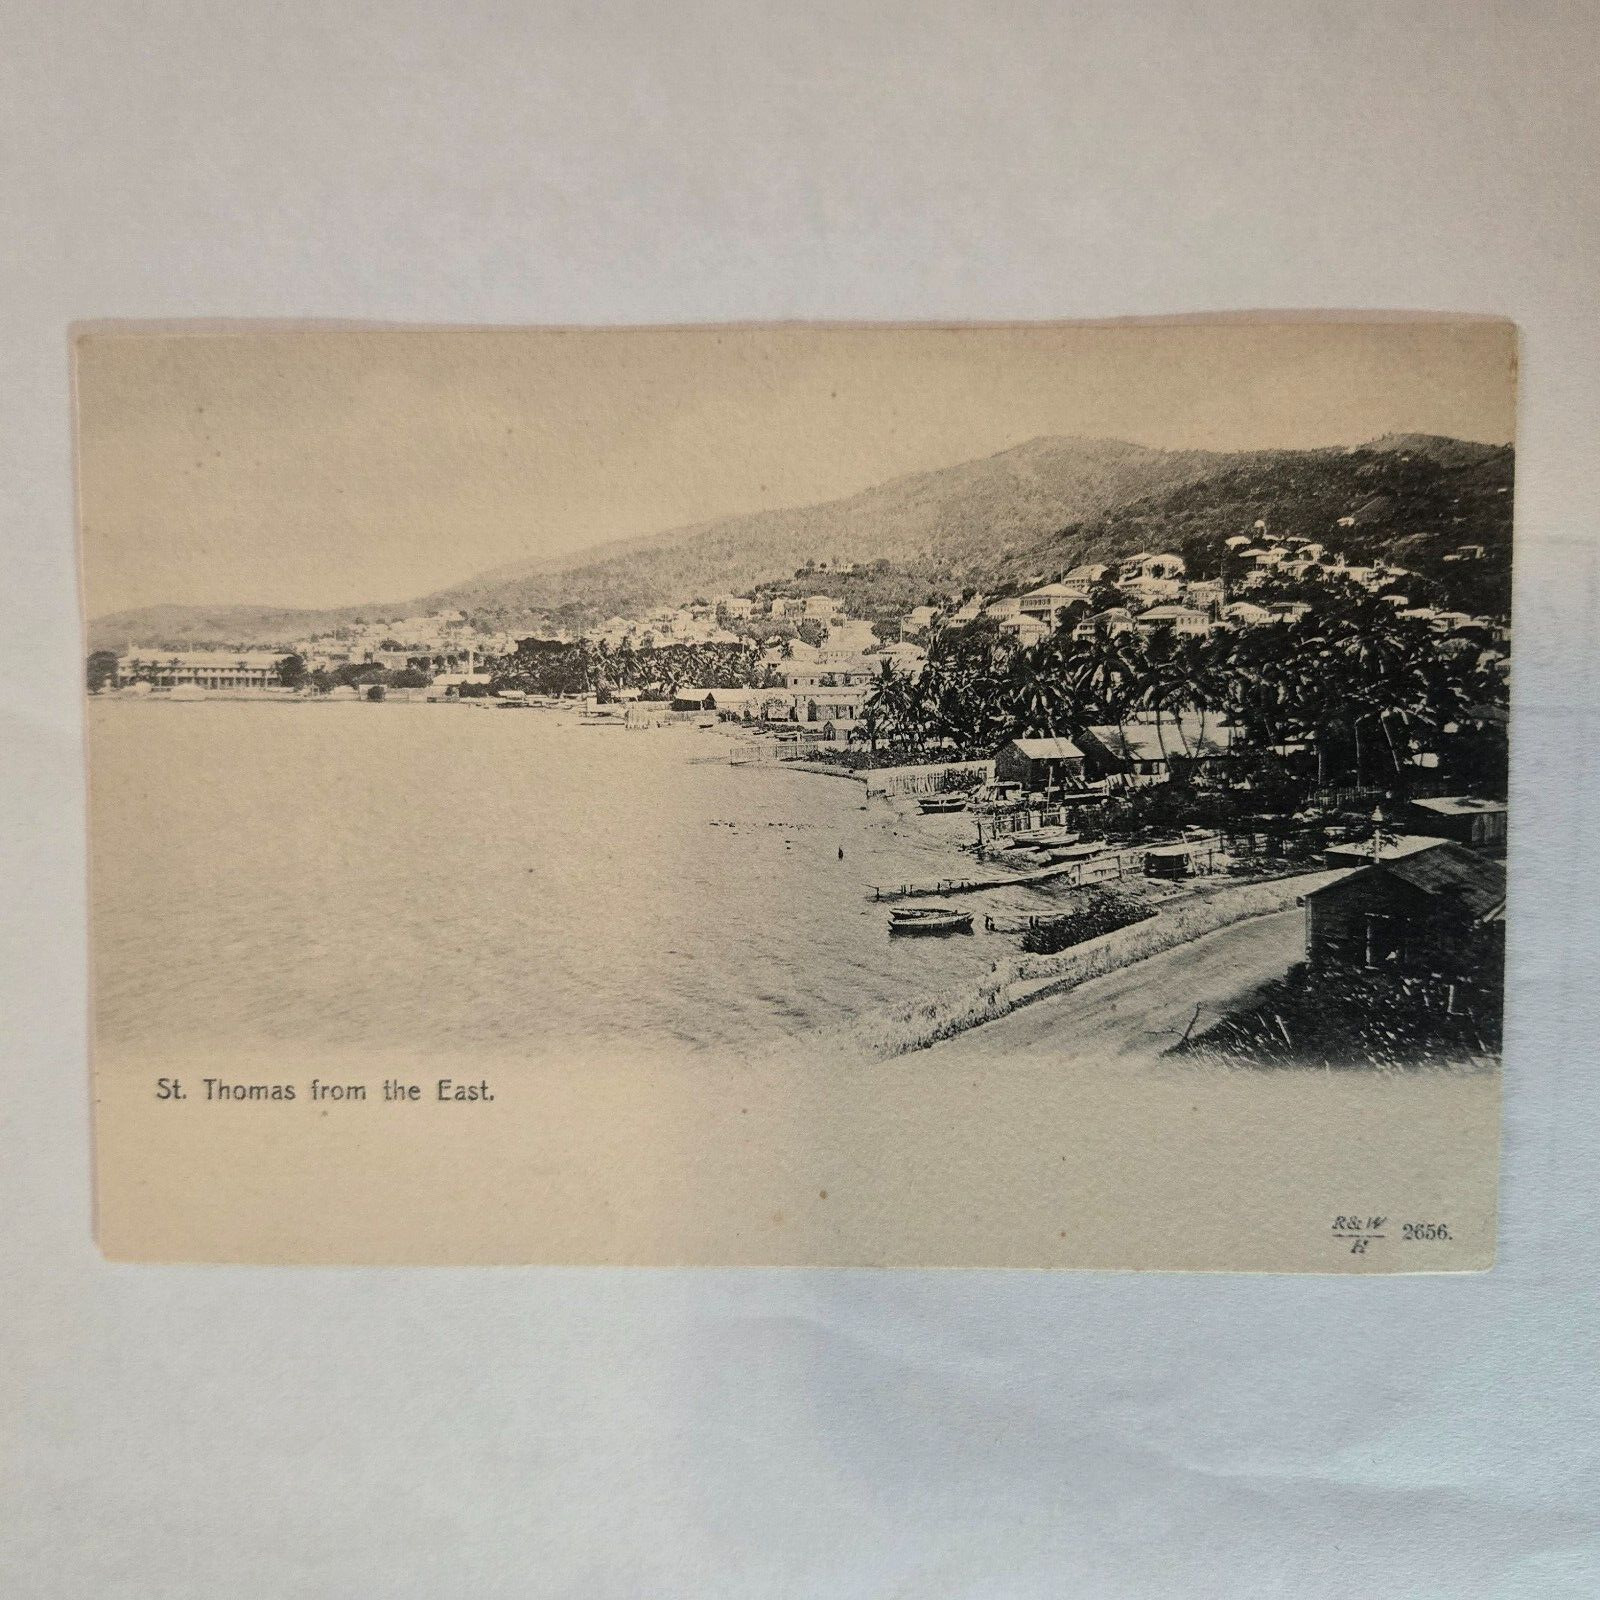 St Thomas Danish West Indies from the East Postcard ca 1905 Charlotte Amalie